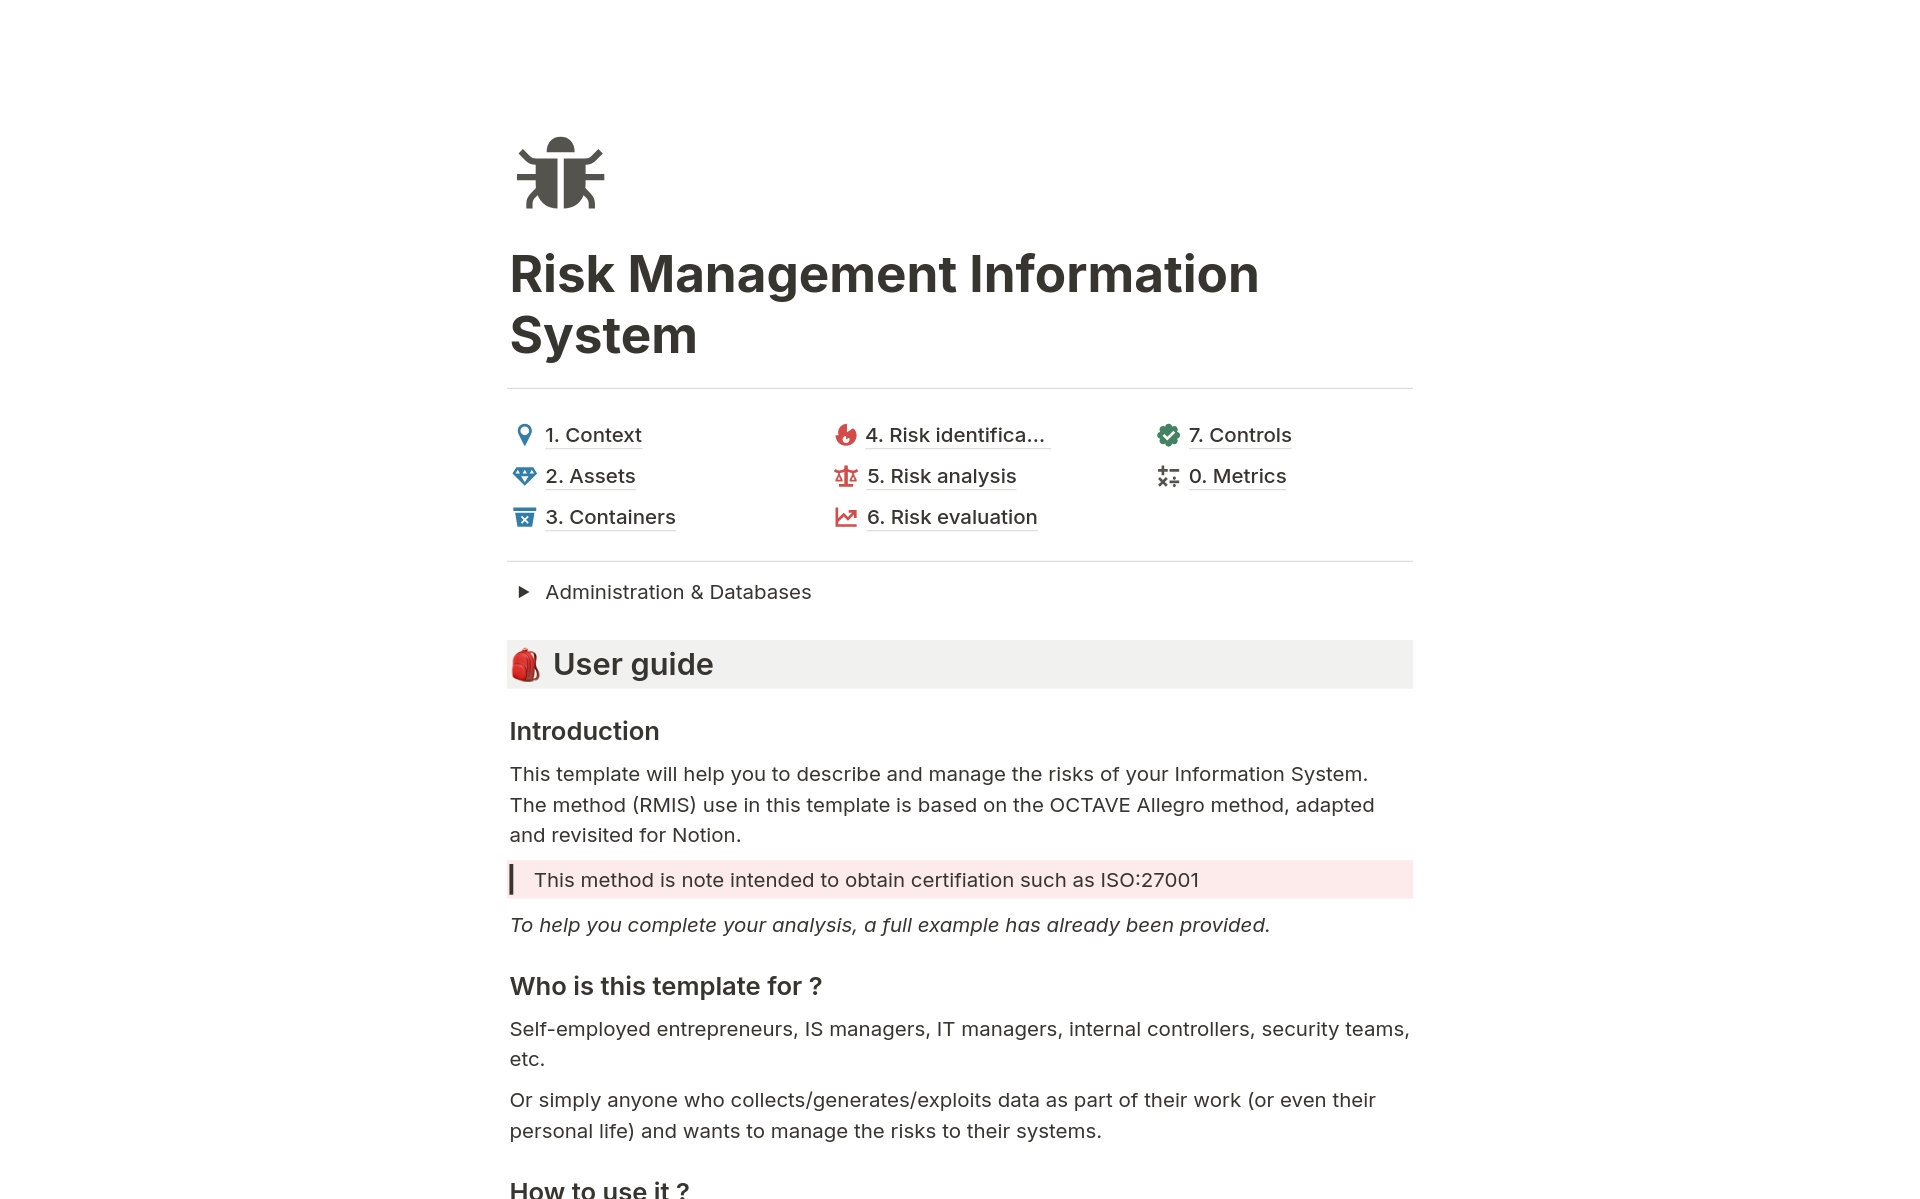 This template will help you to describe and manage the risks of your Information System. The method (RMIS) use in this template is based on the OCTAVE Allegro method, adapted and revisited for Notion.